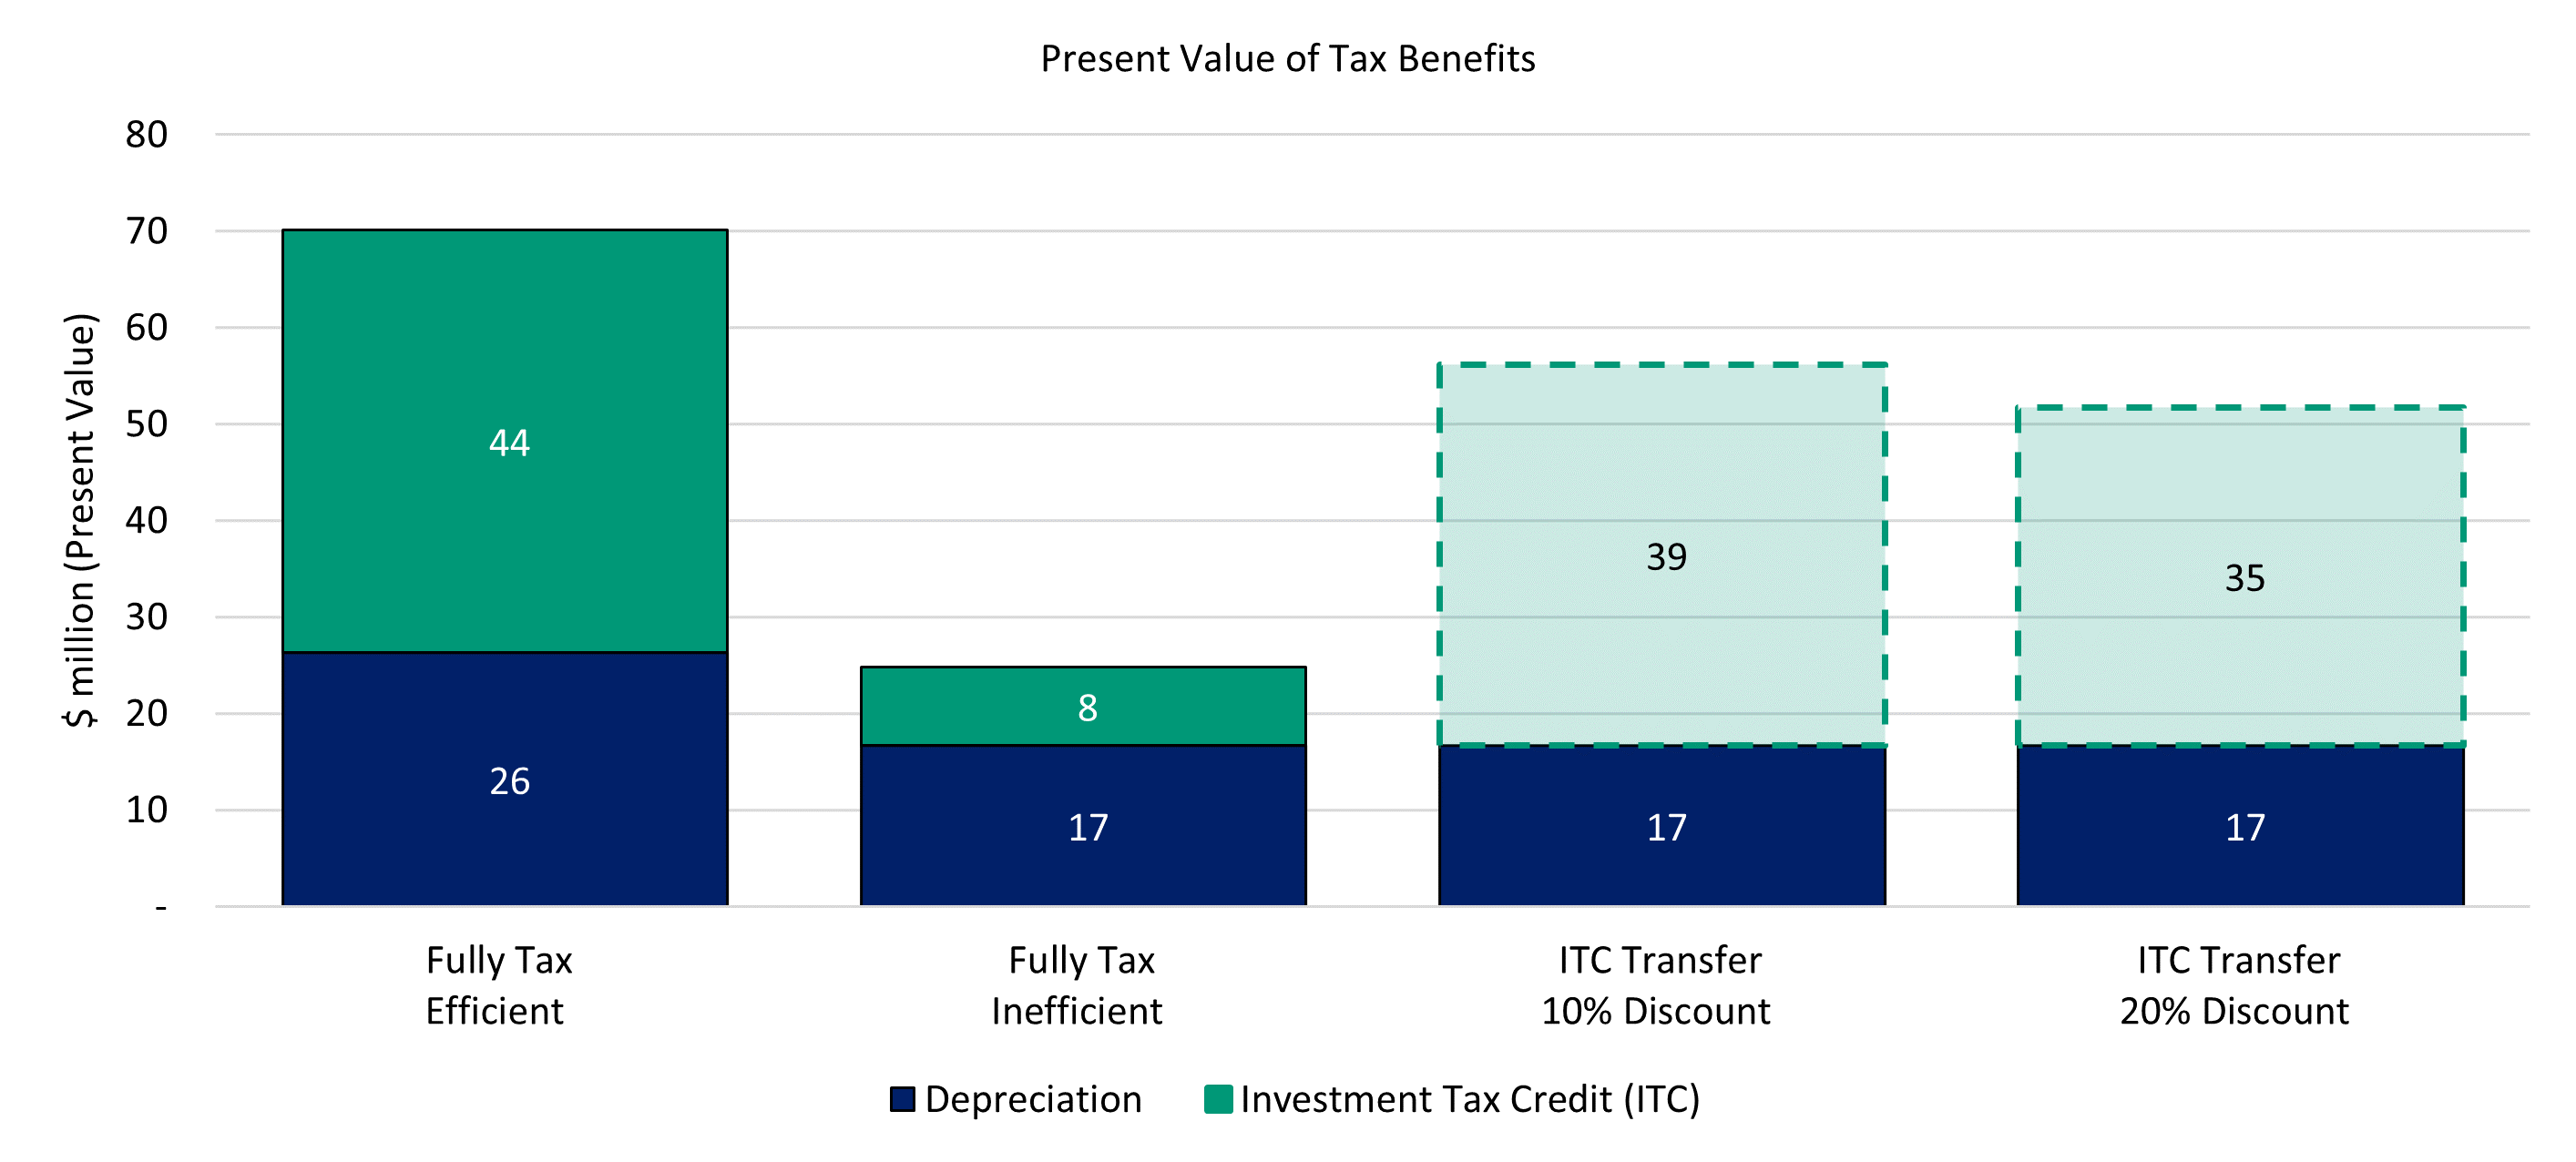 Present value of example solar project tax benefits with transferability